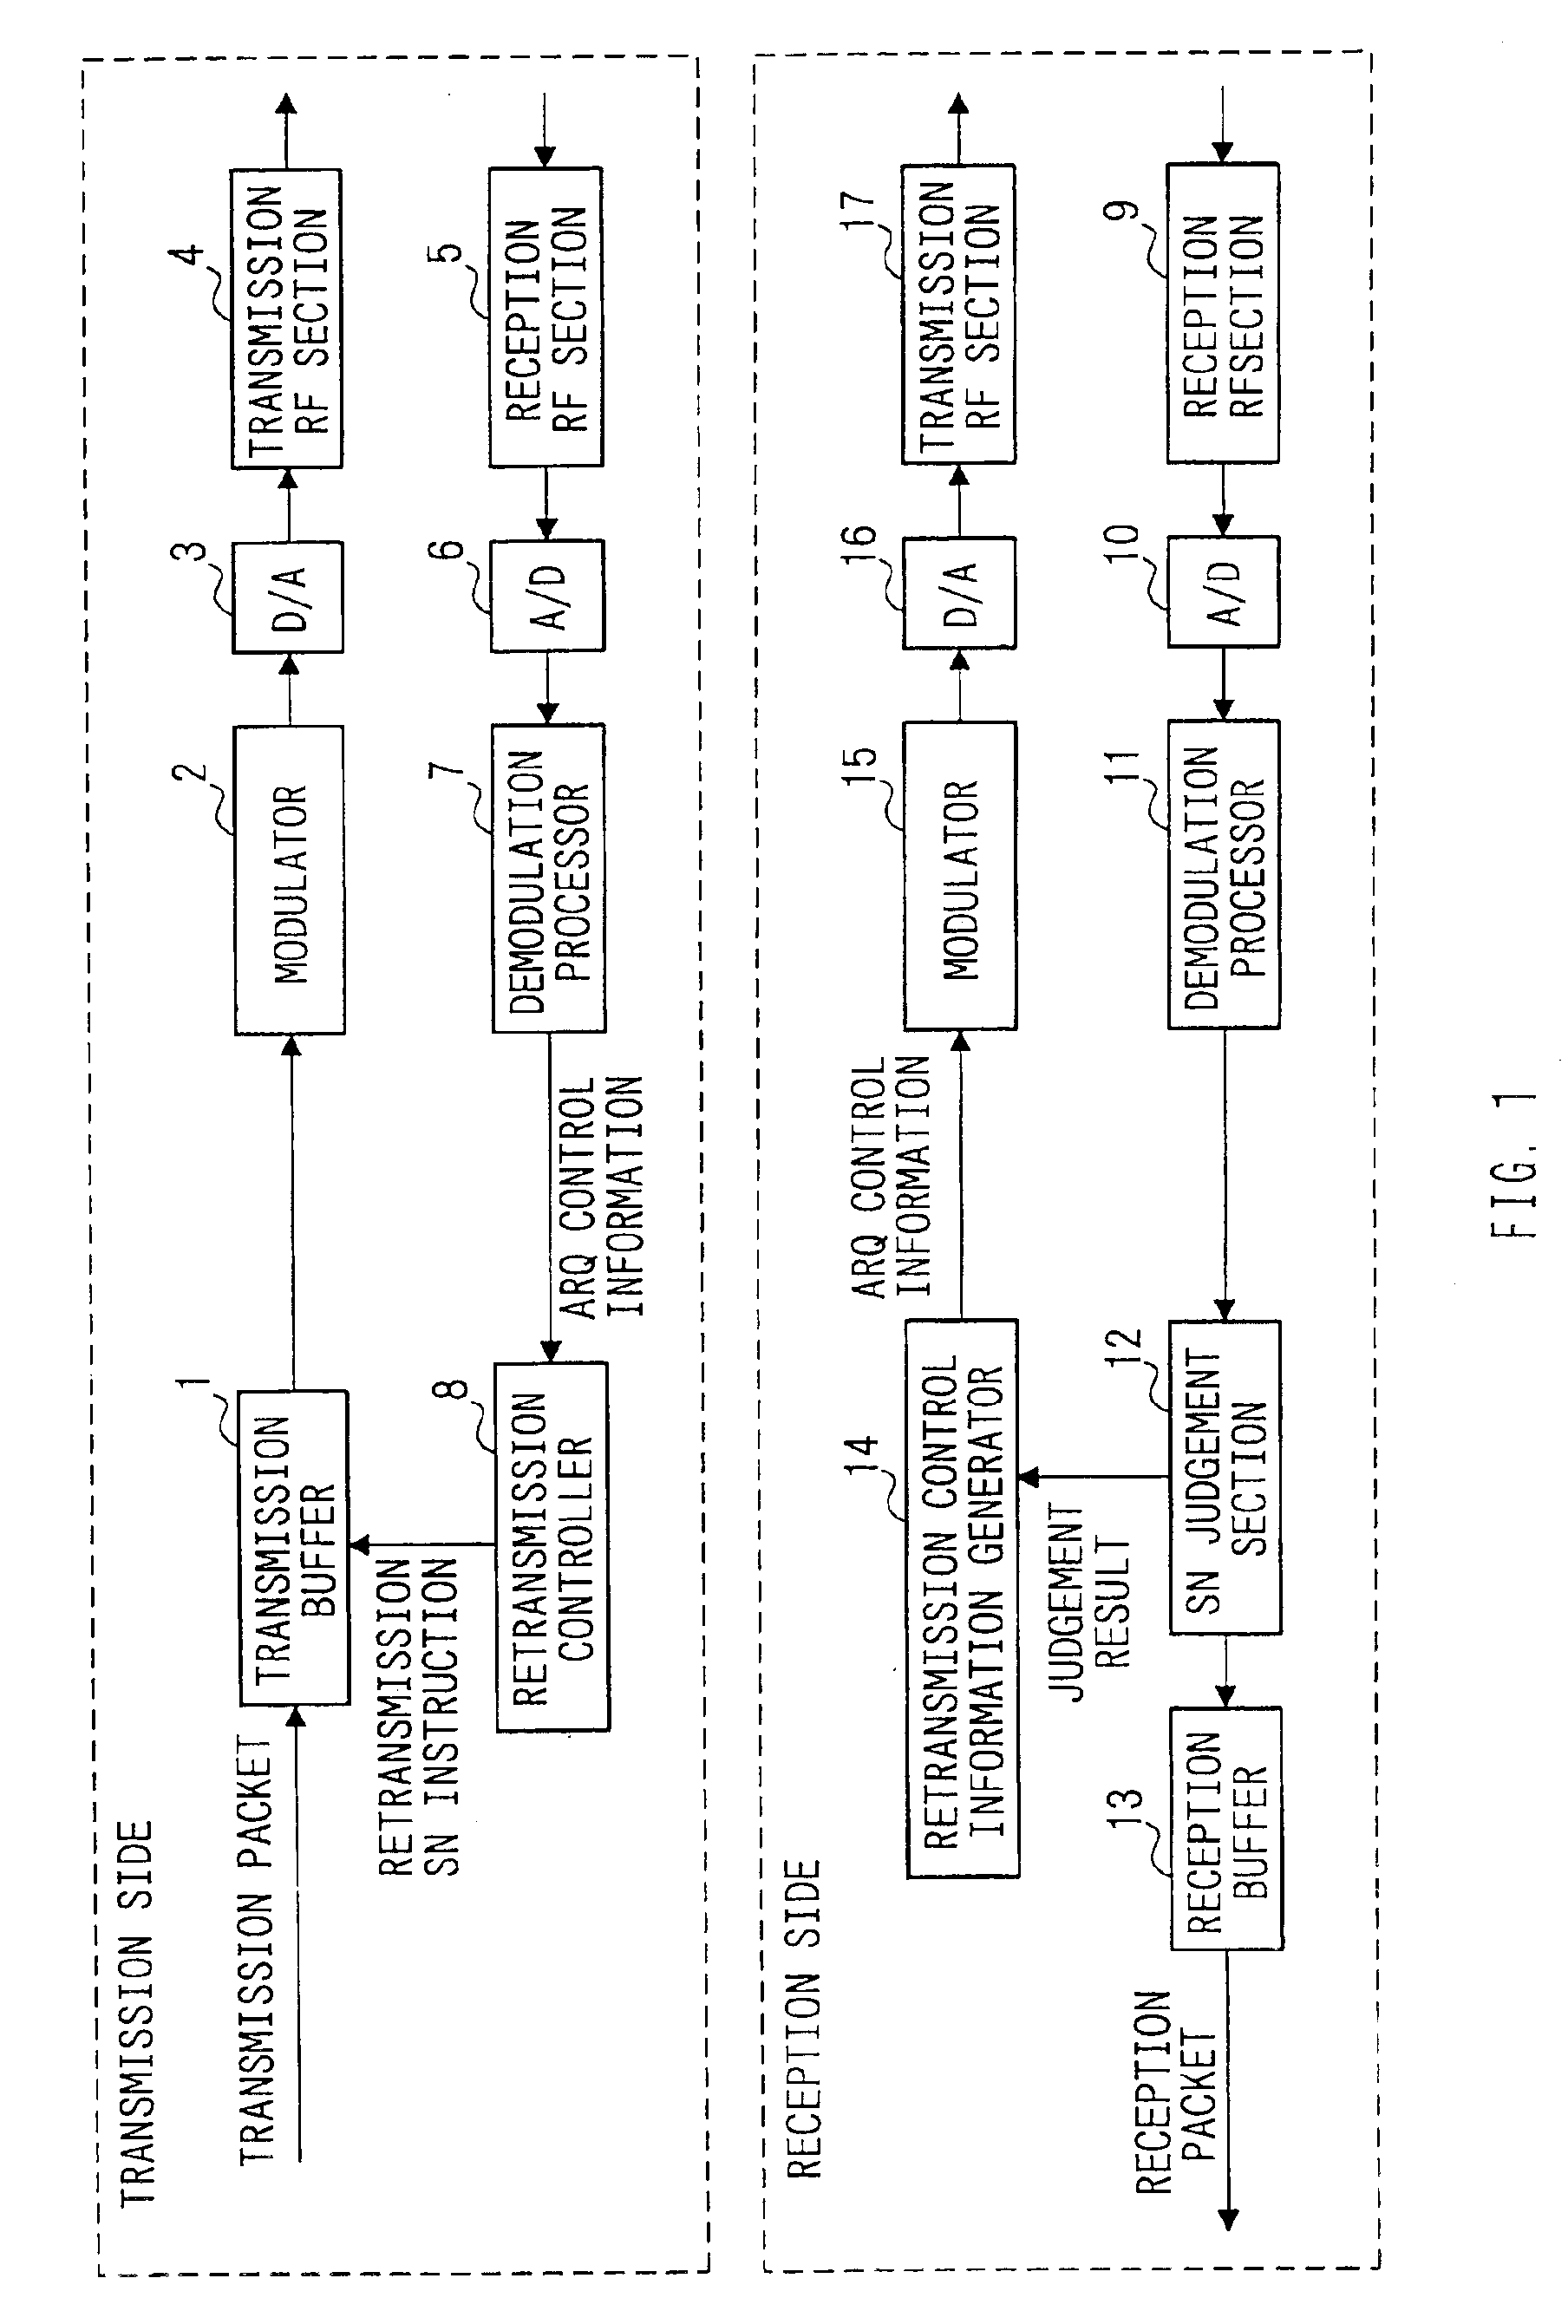 Transmission-reception apparatus and method for performing error control